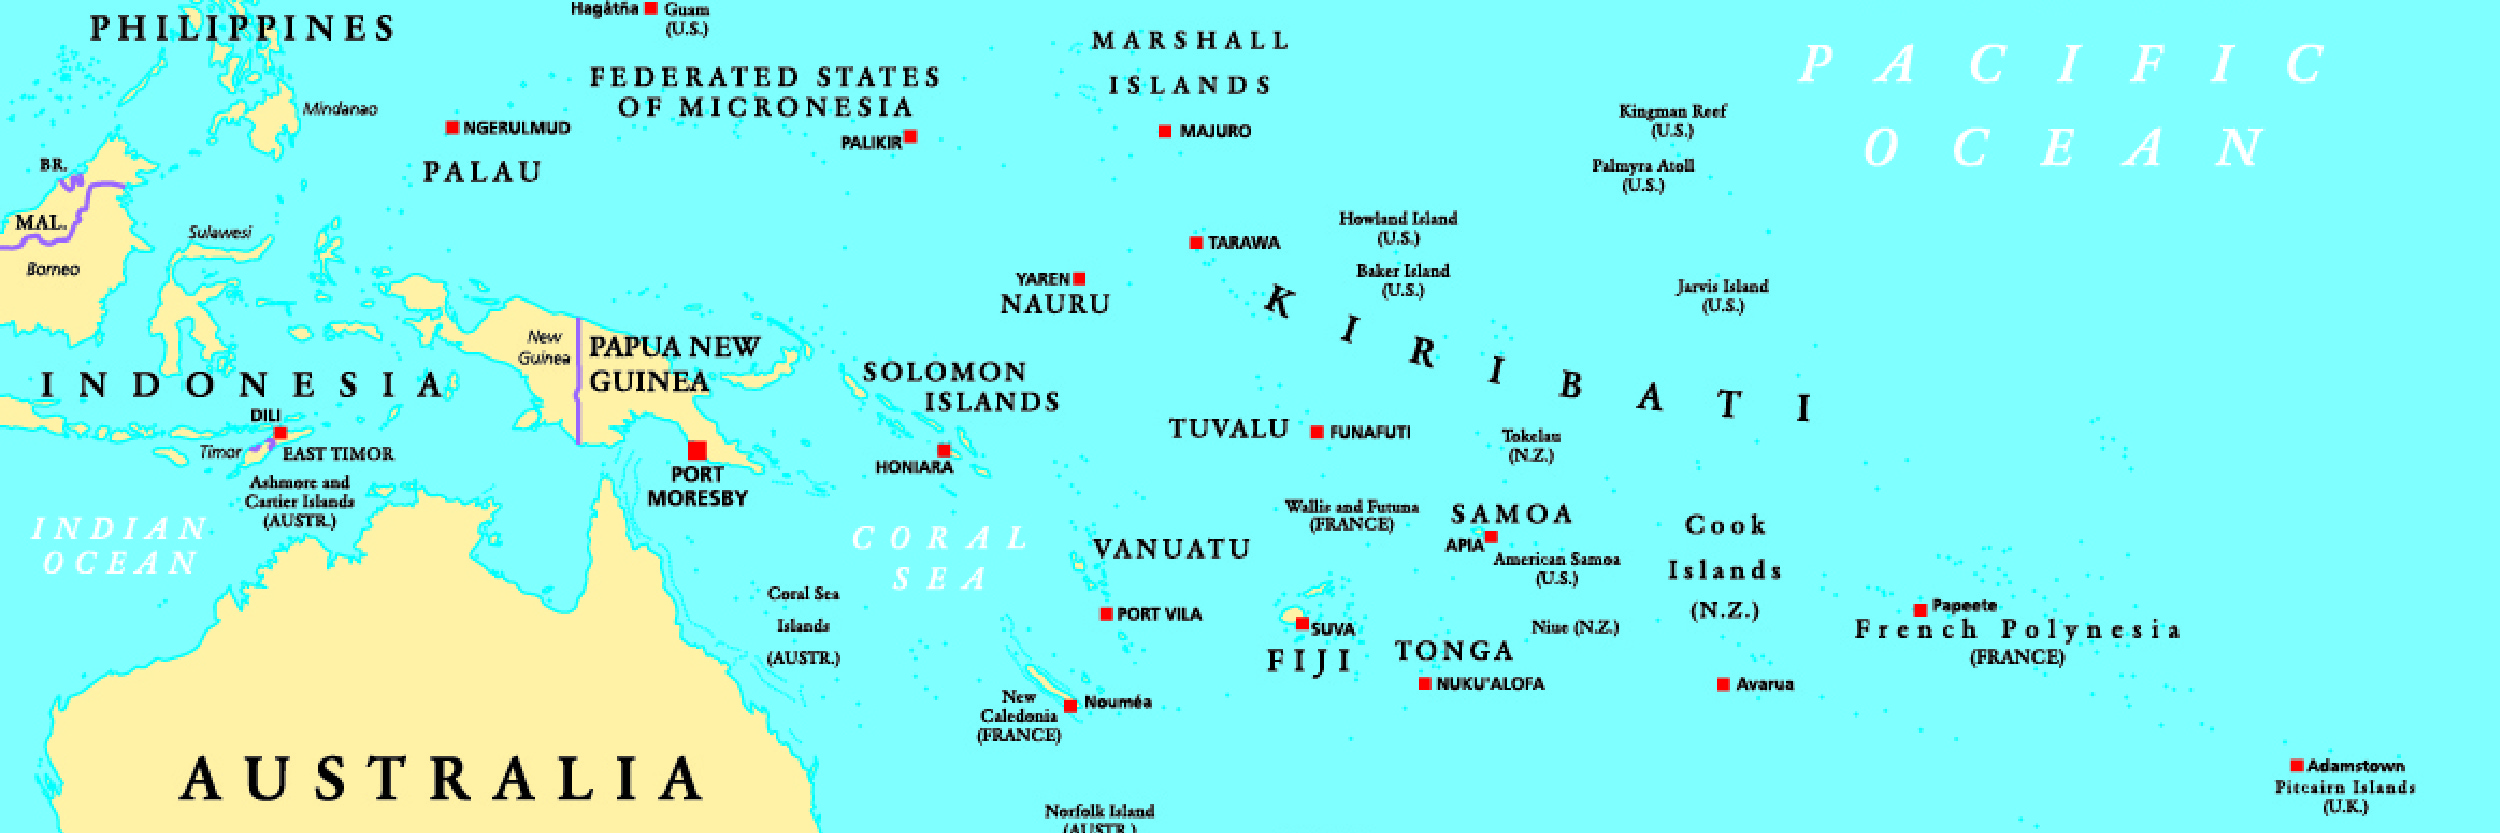 Oceania political map. Region, centered on central Pacific Ocean islands with Australia